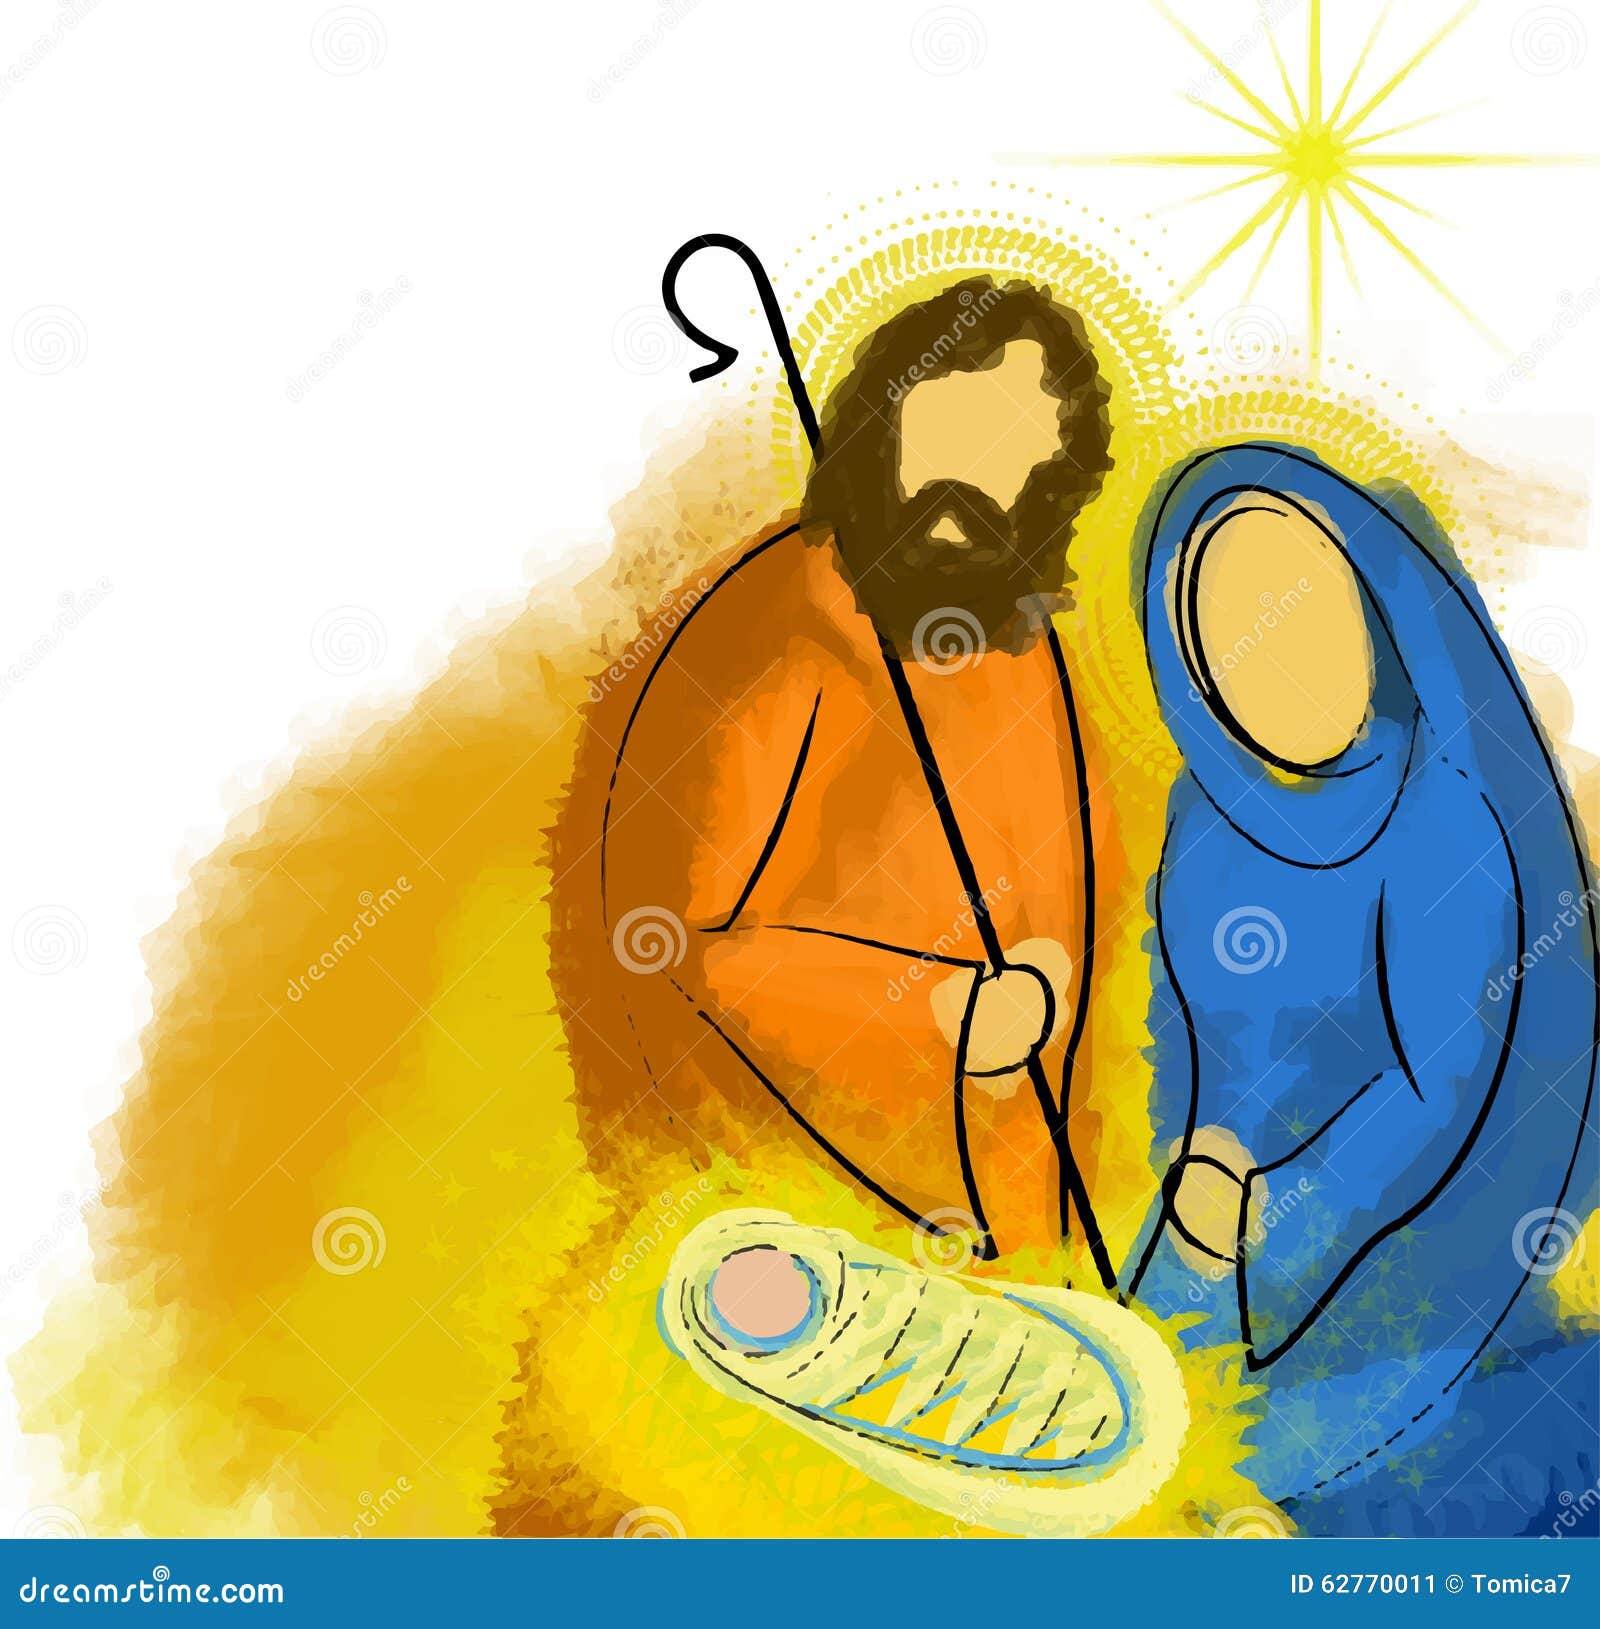 holy family clipart images - photo #27